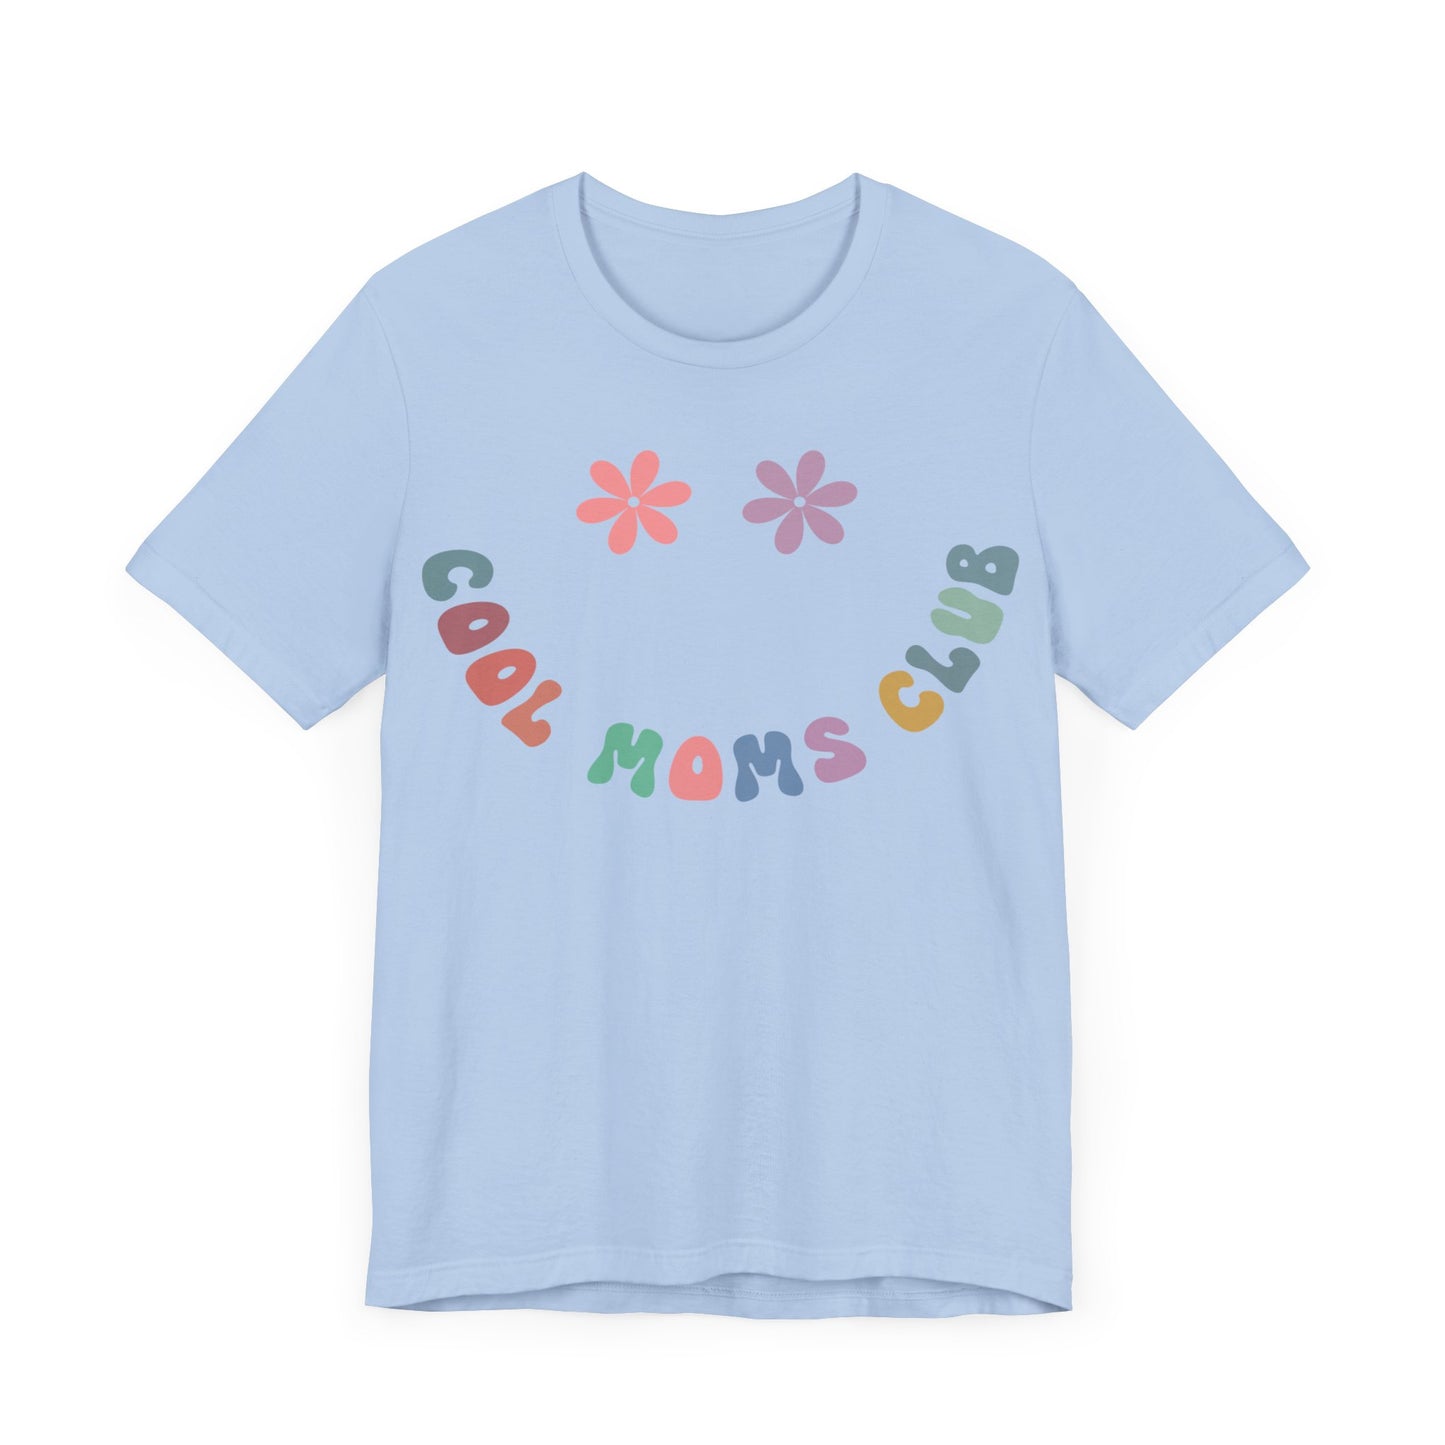 Cool Moms Club Shirt, Happy Mother's Day Gift, Nana Shirt, Mom Shirt, Funny Mom Tshirt, Mama Shirt